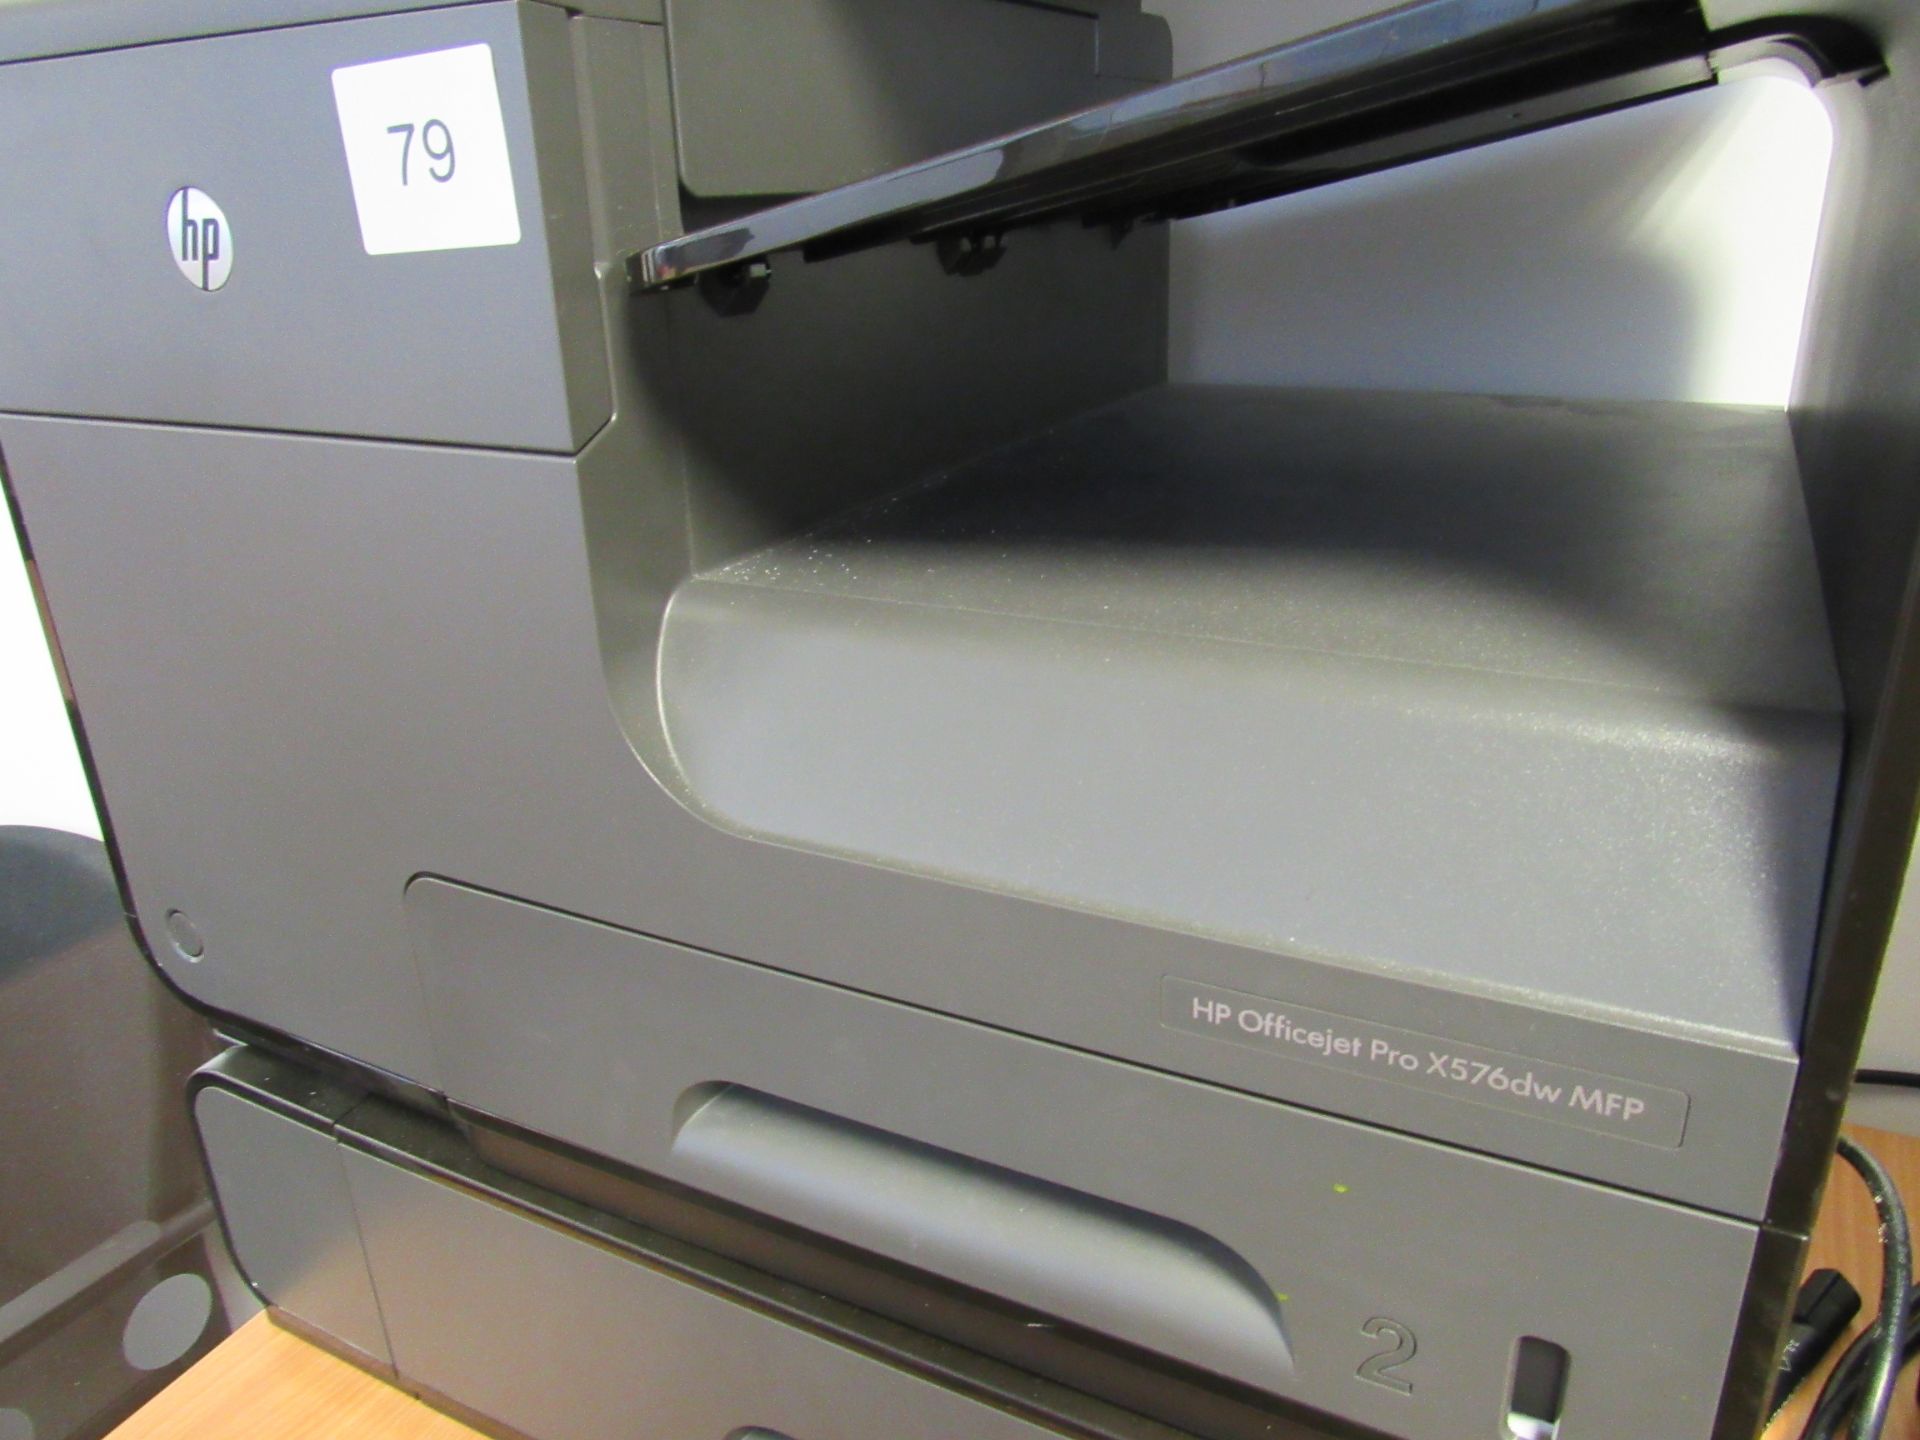 HP Officejet Pro x 576dw MFP Laser Printer/Copier – (Located in York) - Image 3 of 3